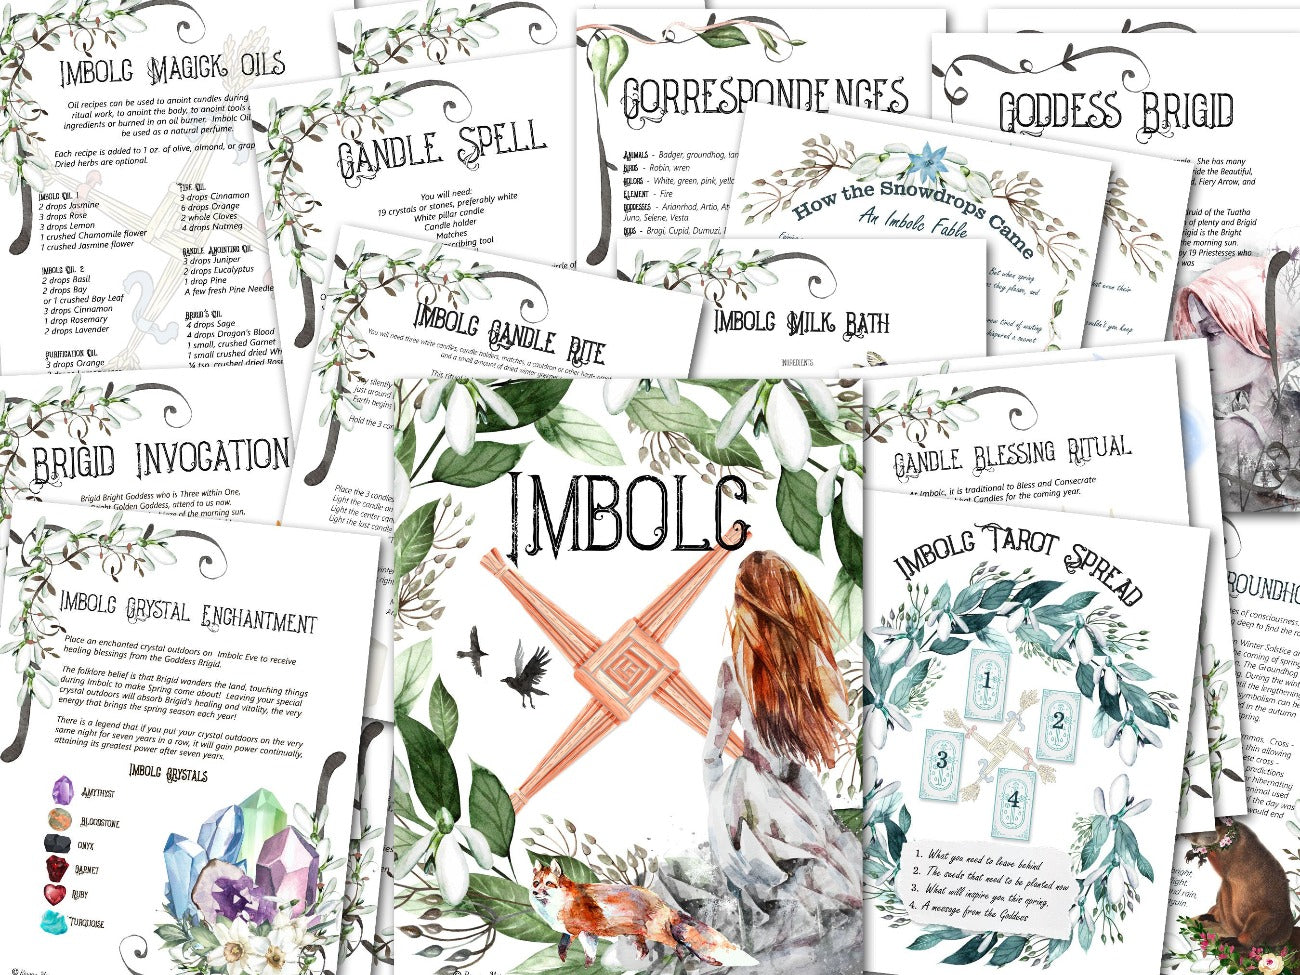 Imbolc Bundle Pages, Wicca Witch Seaonal Celebrations, Baby Witch, Wheel of the Year, Sabbat Grimoire, Sabbat Traditions - Morgana Magick Spell